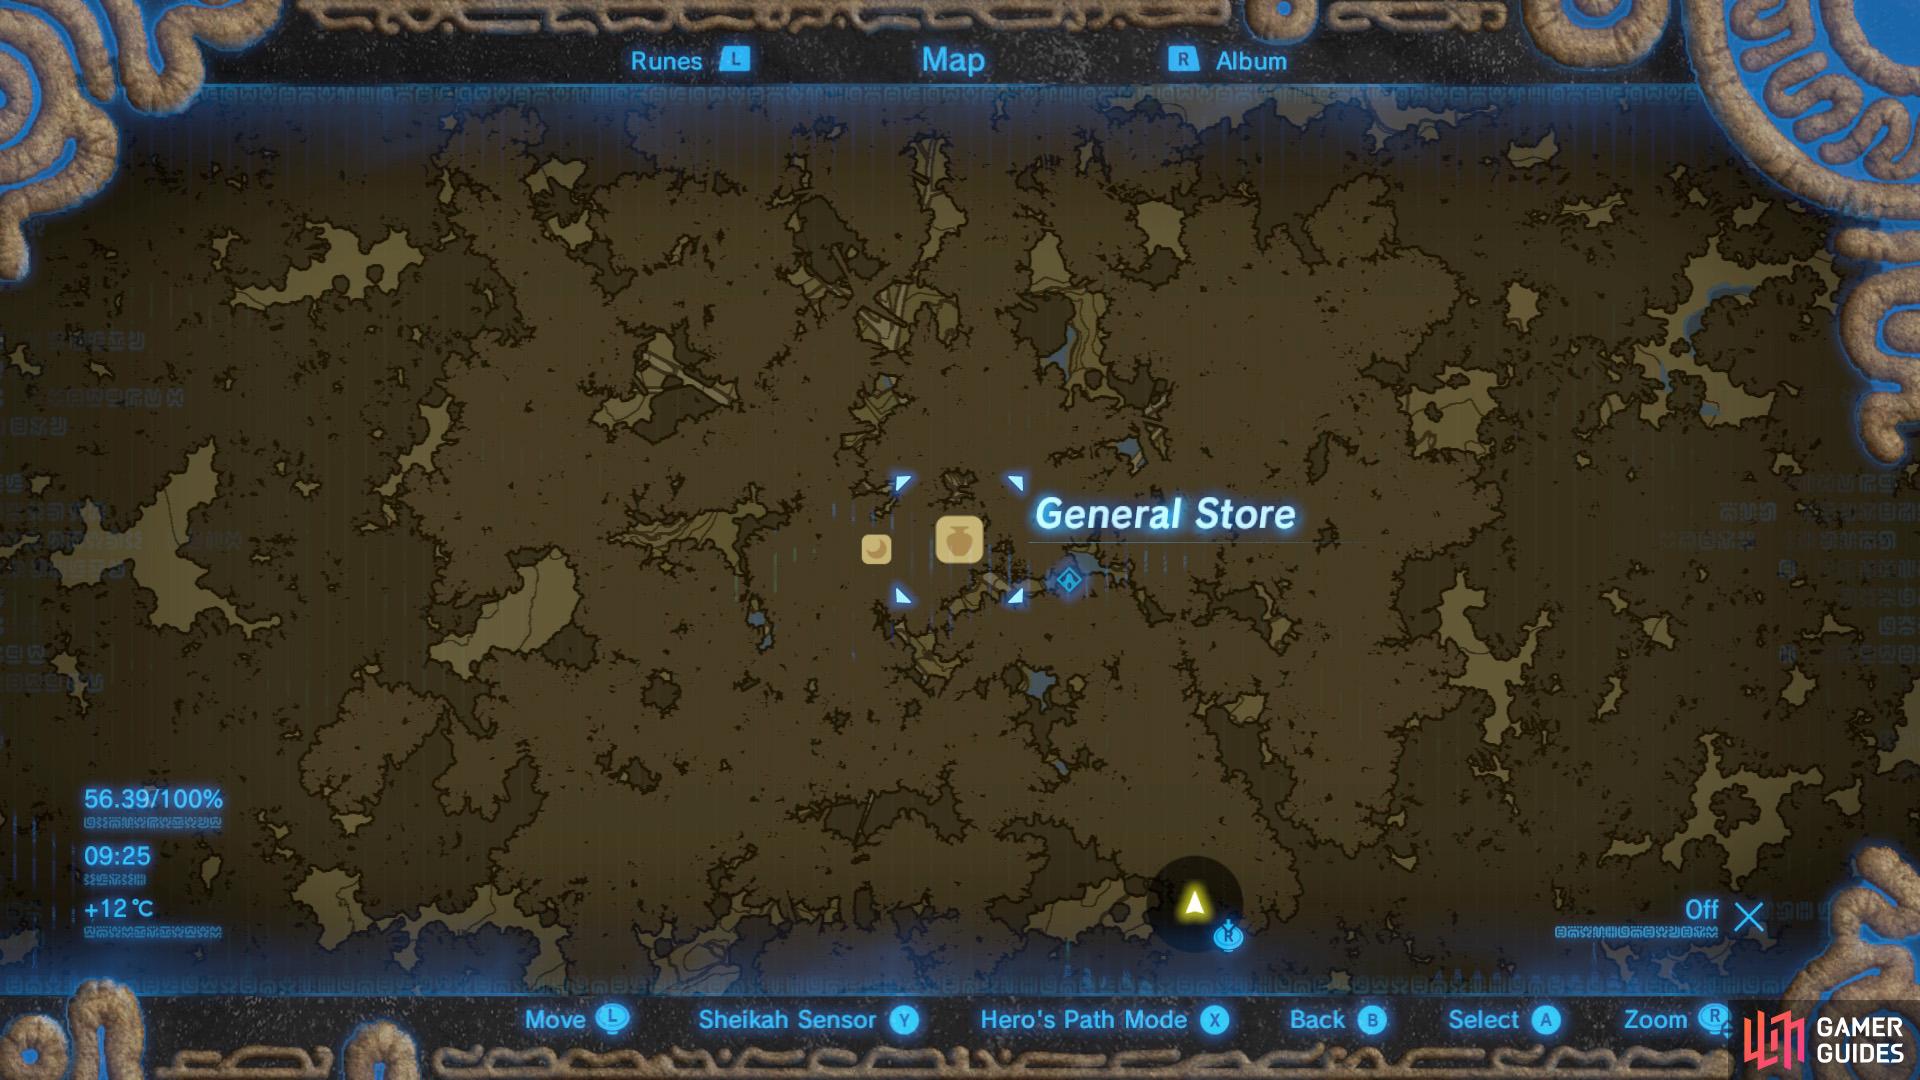 The General Store at Korok Forest.